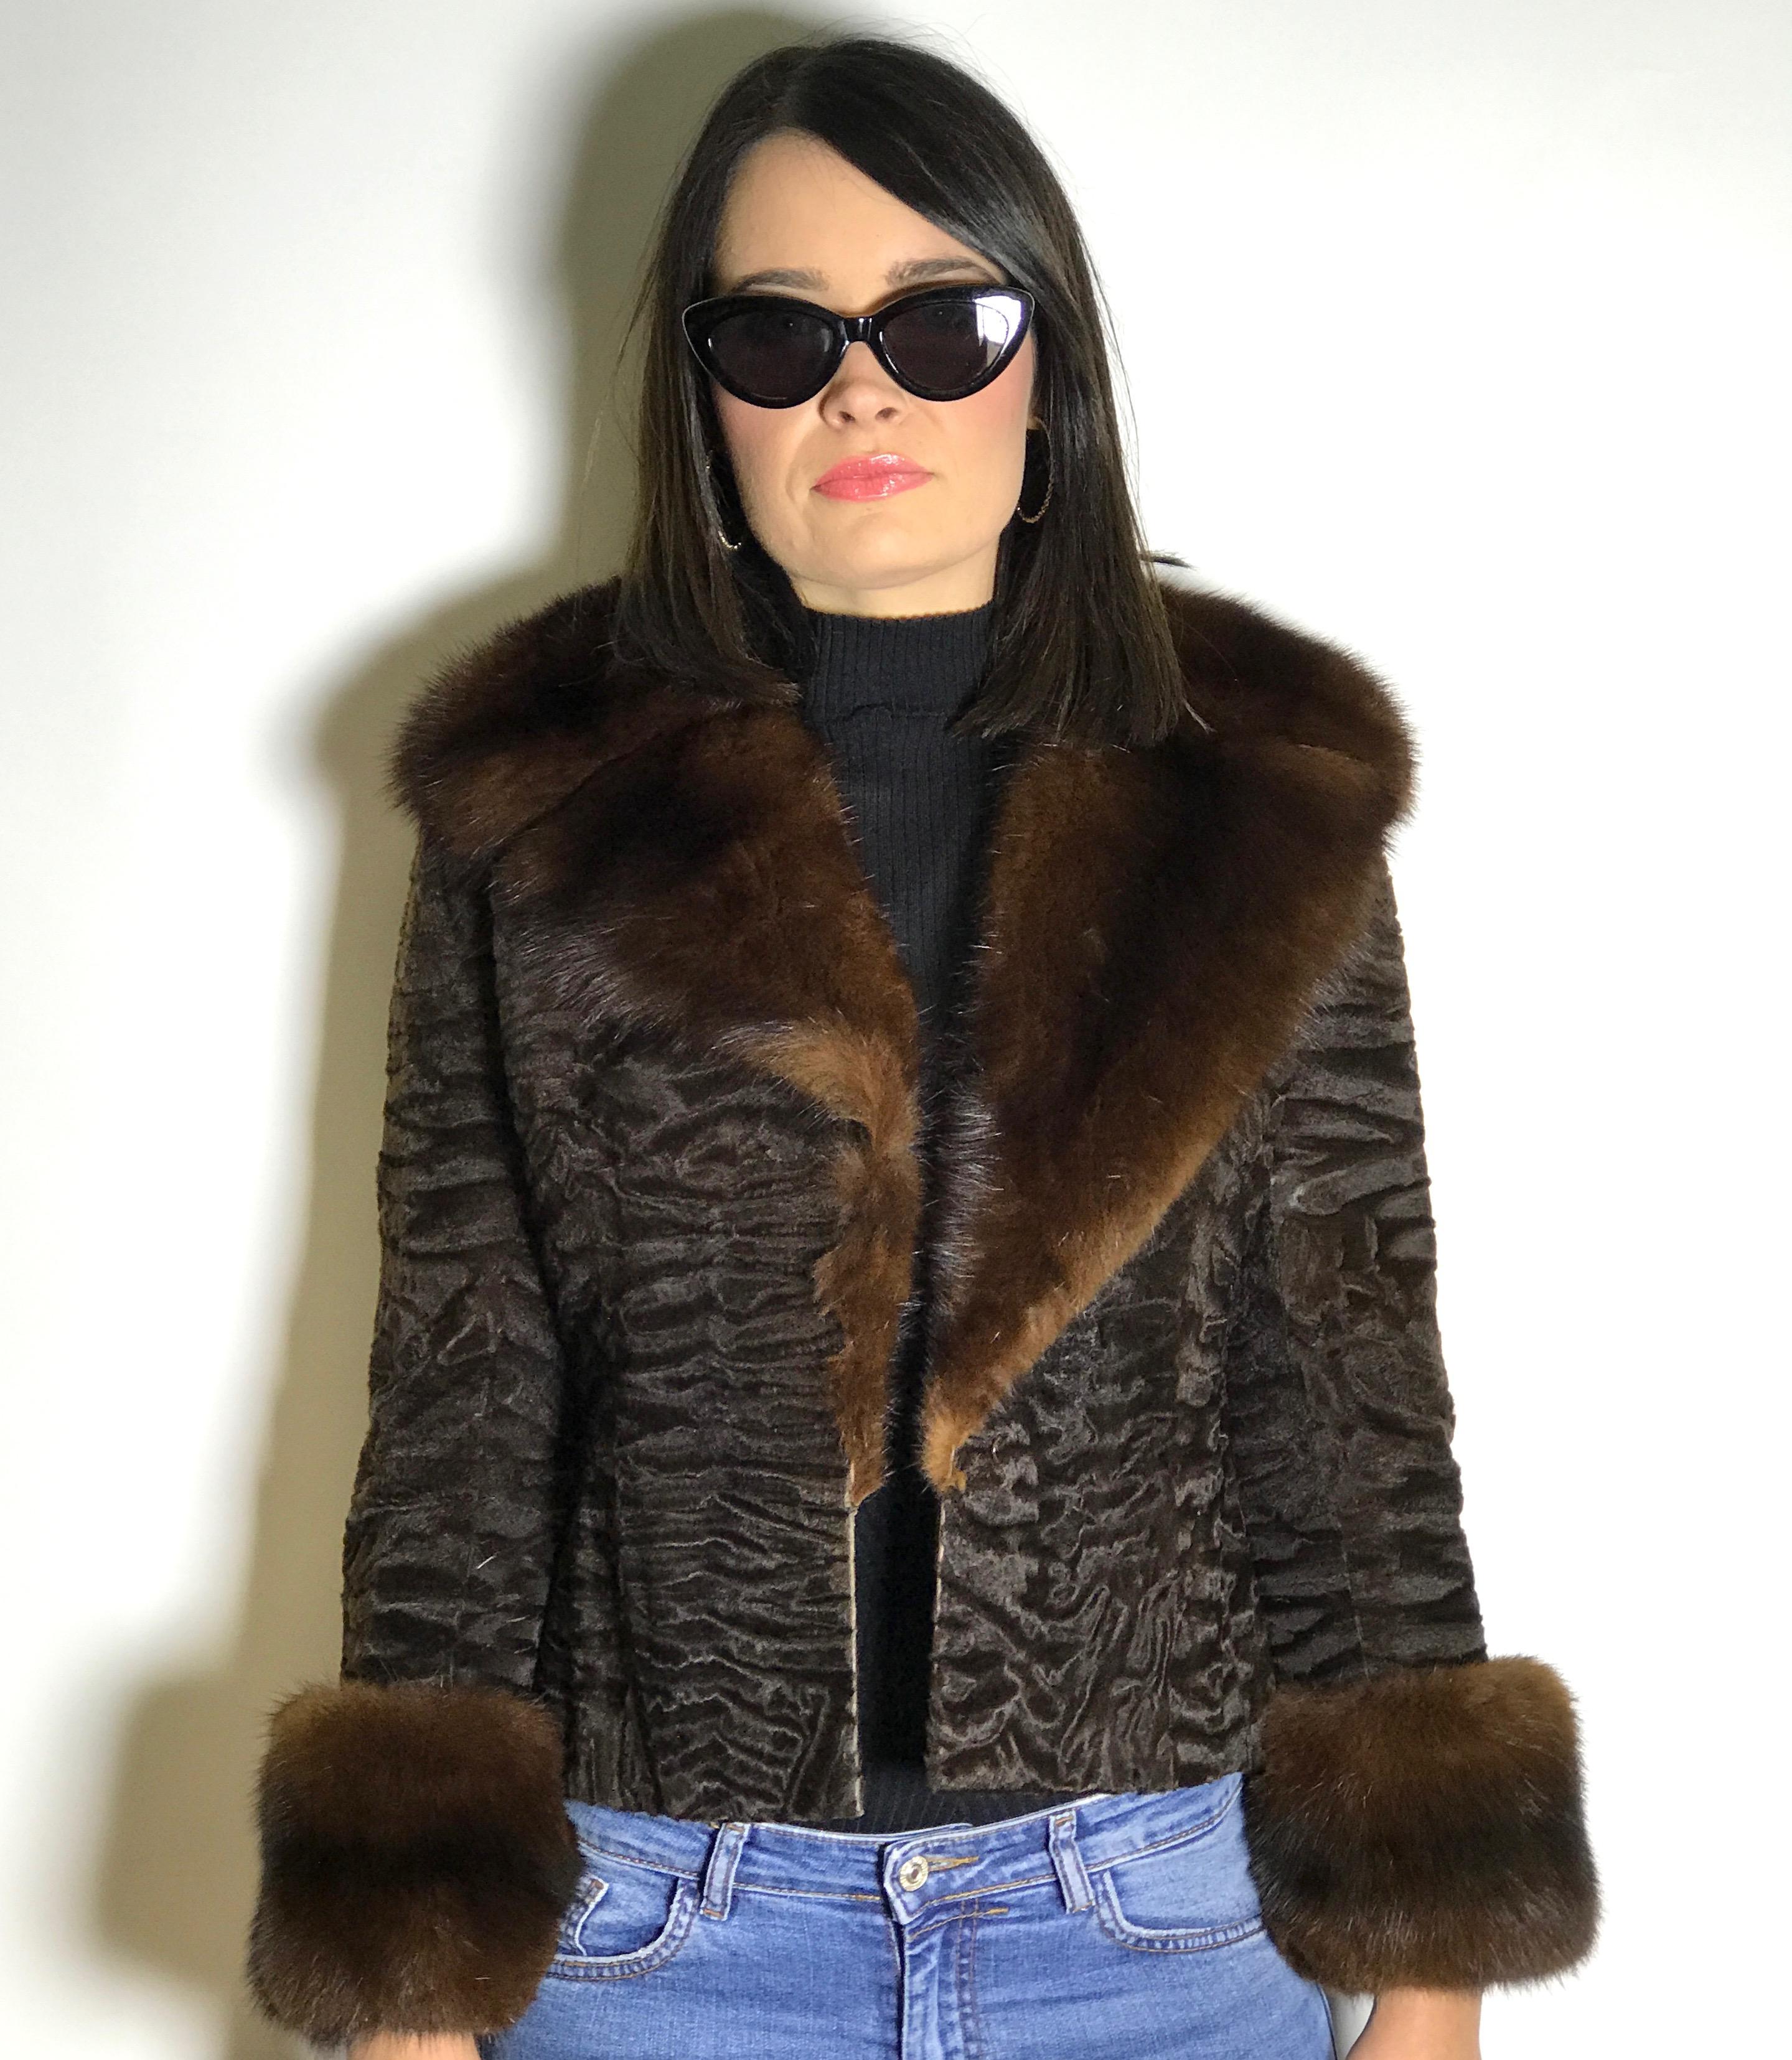 Unique Broad-tailed Persians fur jacket with russian-Sable on the collar and on the sleeves.
Exclusively made by Schrank. 
First-class furrier making with silky soft furs, an absolute dream piece.

Size EU: 32 - 34 / XS
Total length: 52 cm
Shoulder